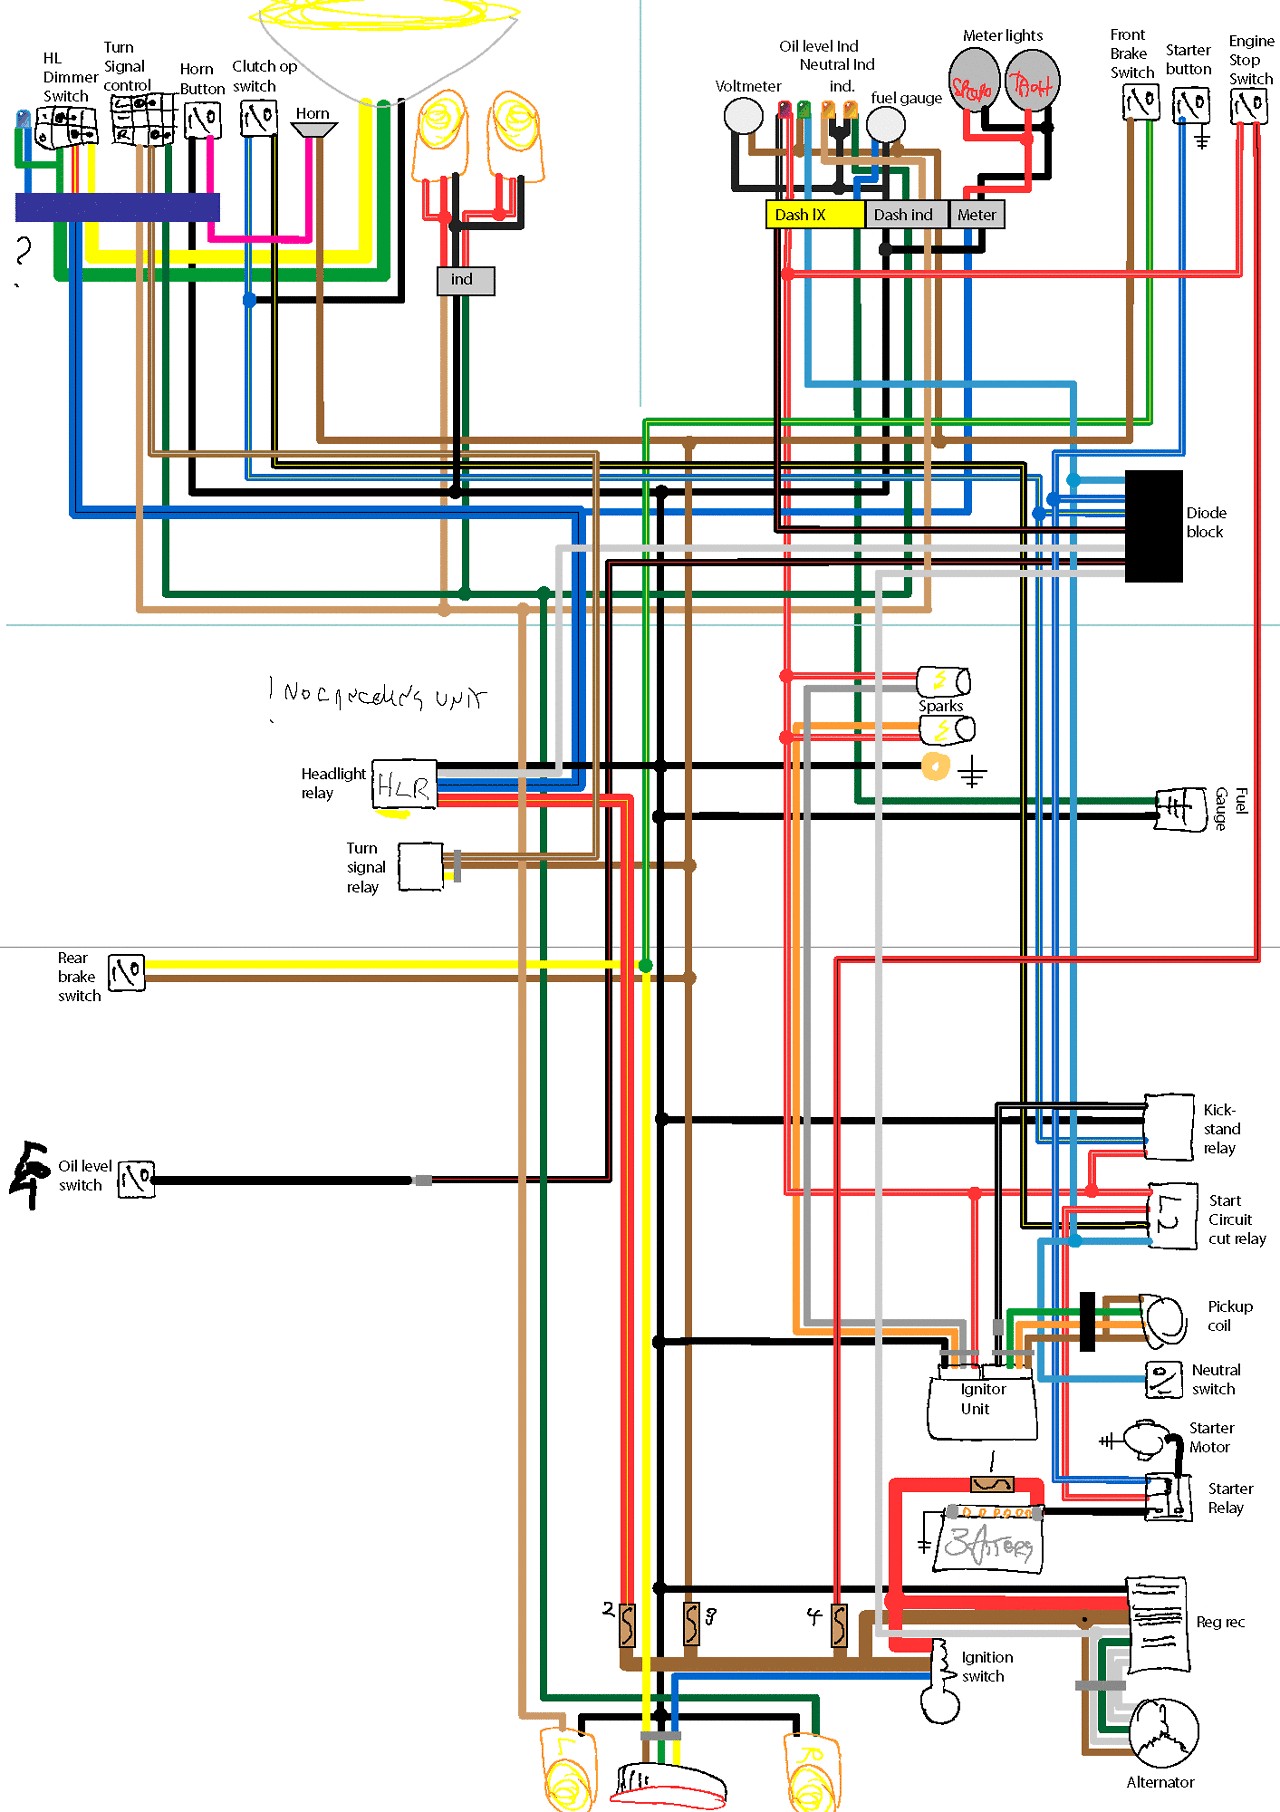 Engineering Block Diagram Land Rover Discovery Wiring Diagram Of Engineering Block Diagram